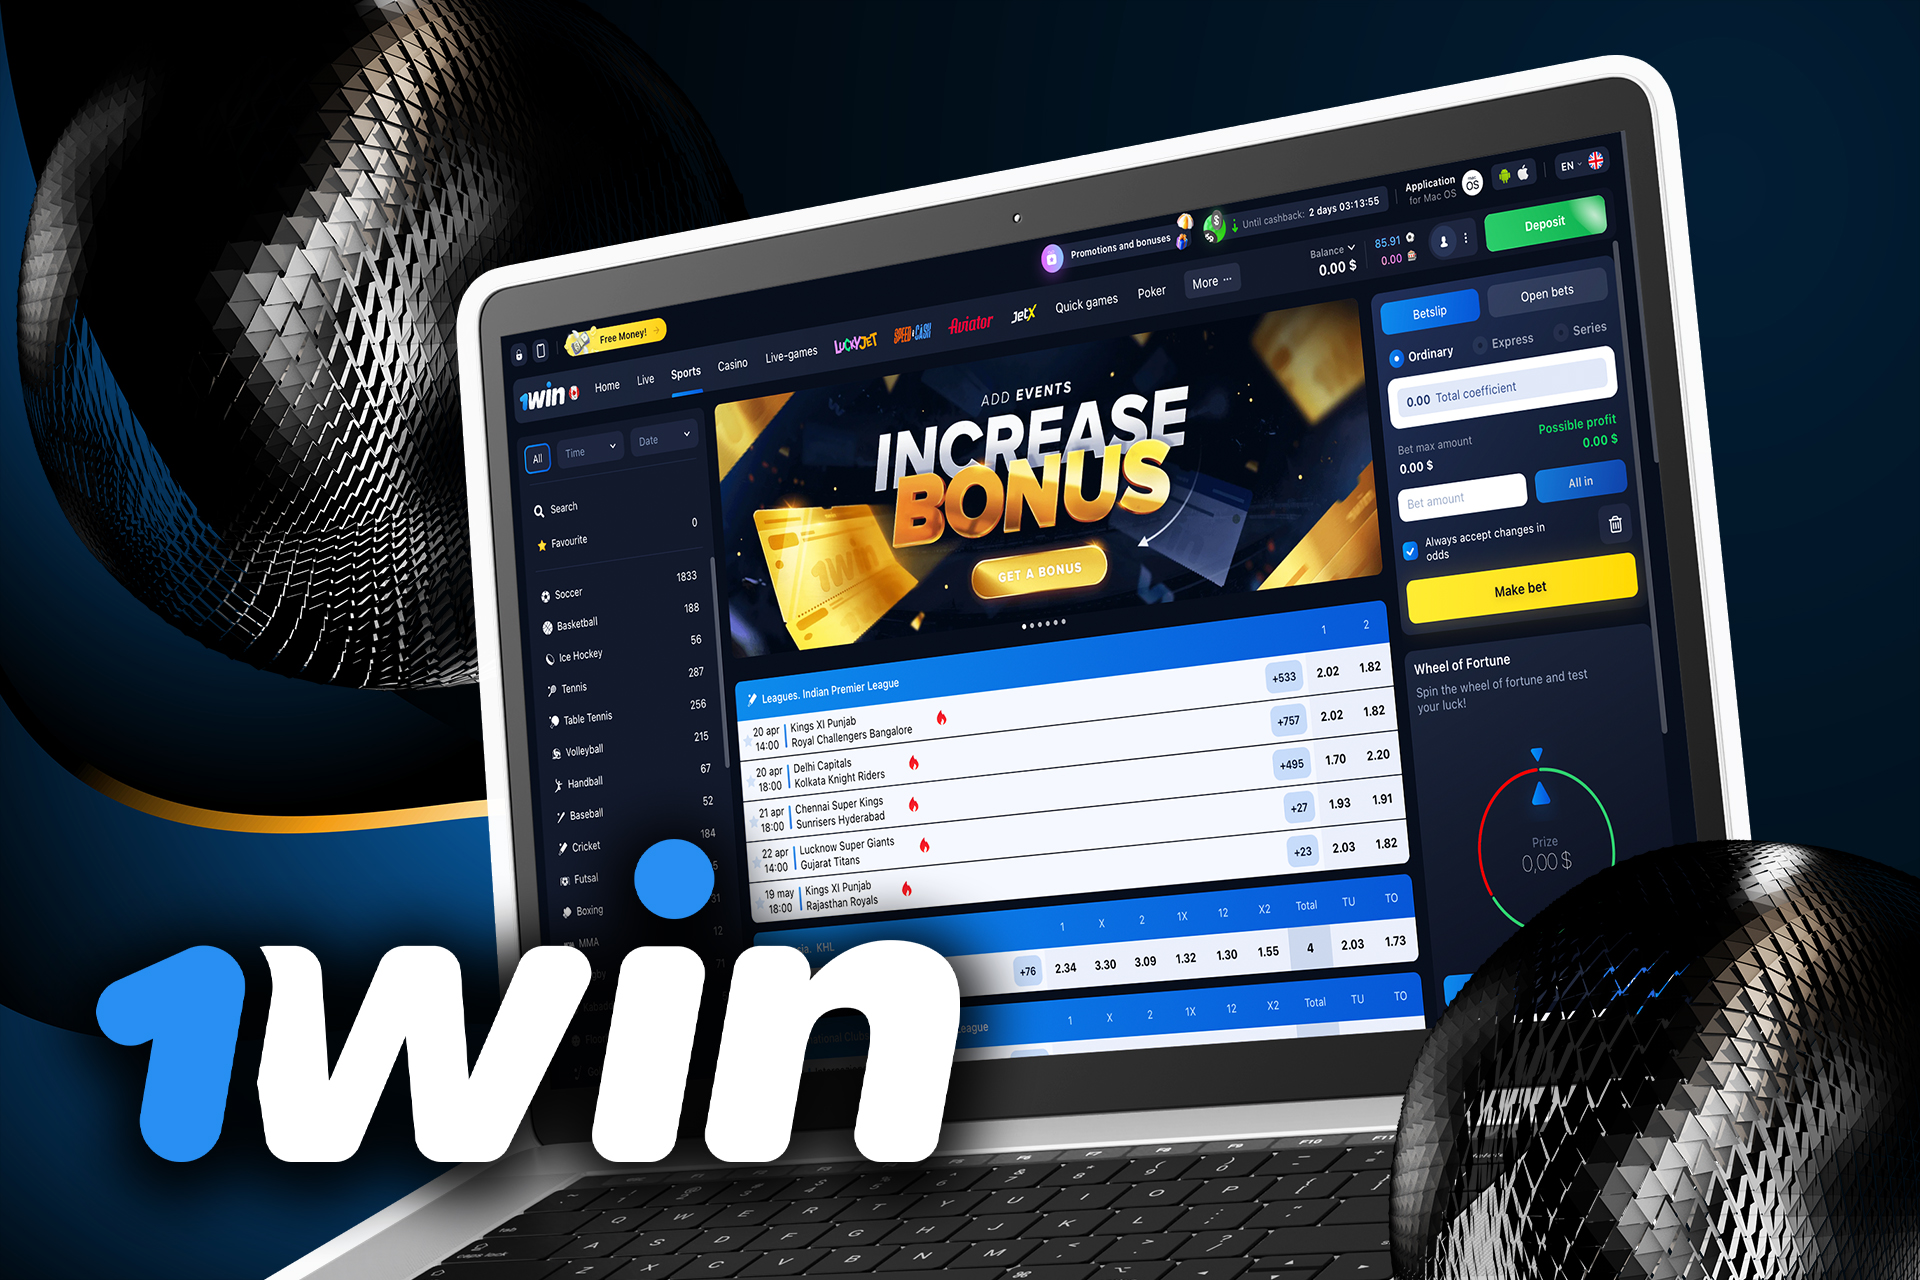 Go to the sportsbook to start betting on sports on 1win.